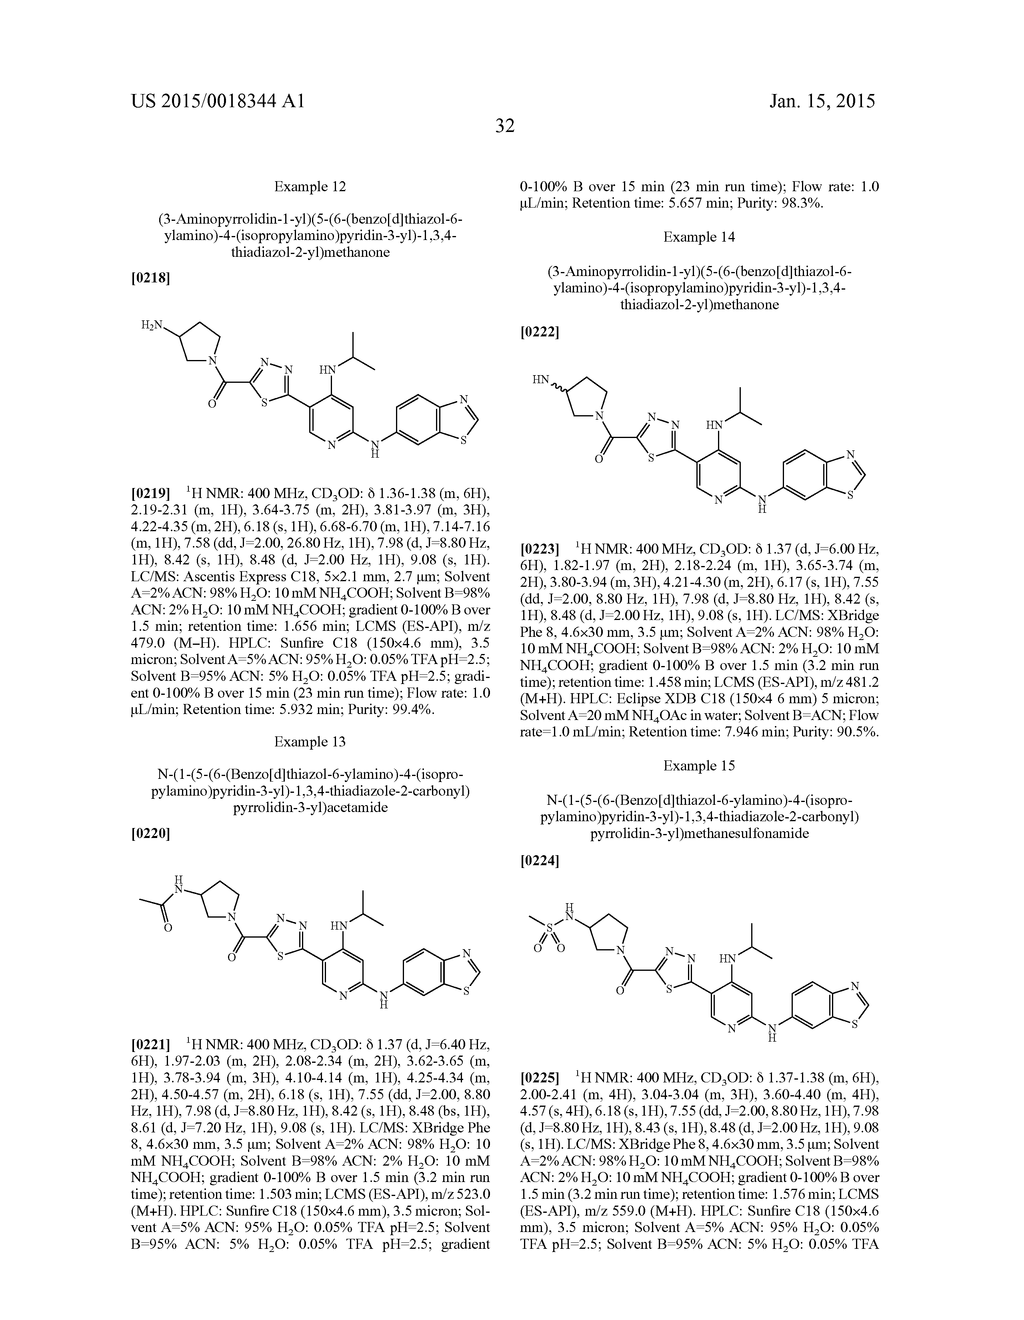 THIAZOLYL- OR THIADIAZOLYL-SUBSTITUTED PYRIDYL COMPOUNDS USEFUL AS KINASE     INHIBITORS - diagram, schematic, and image 33